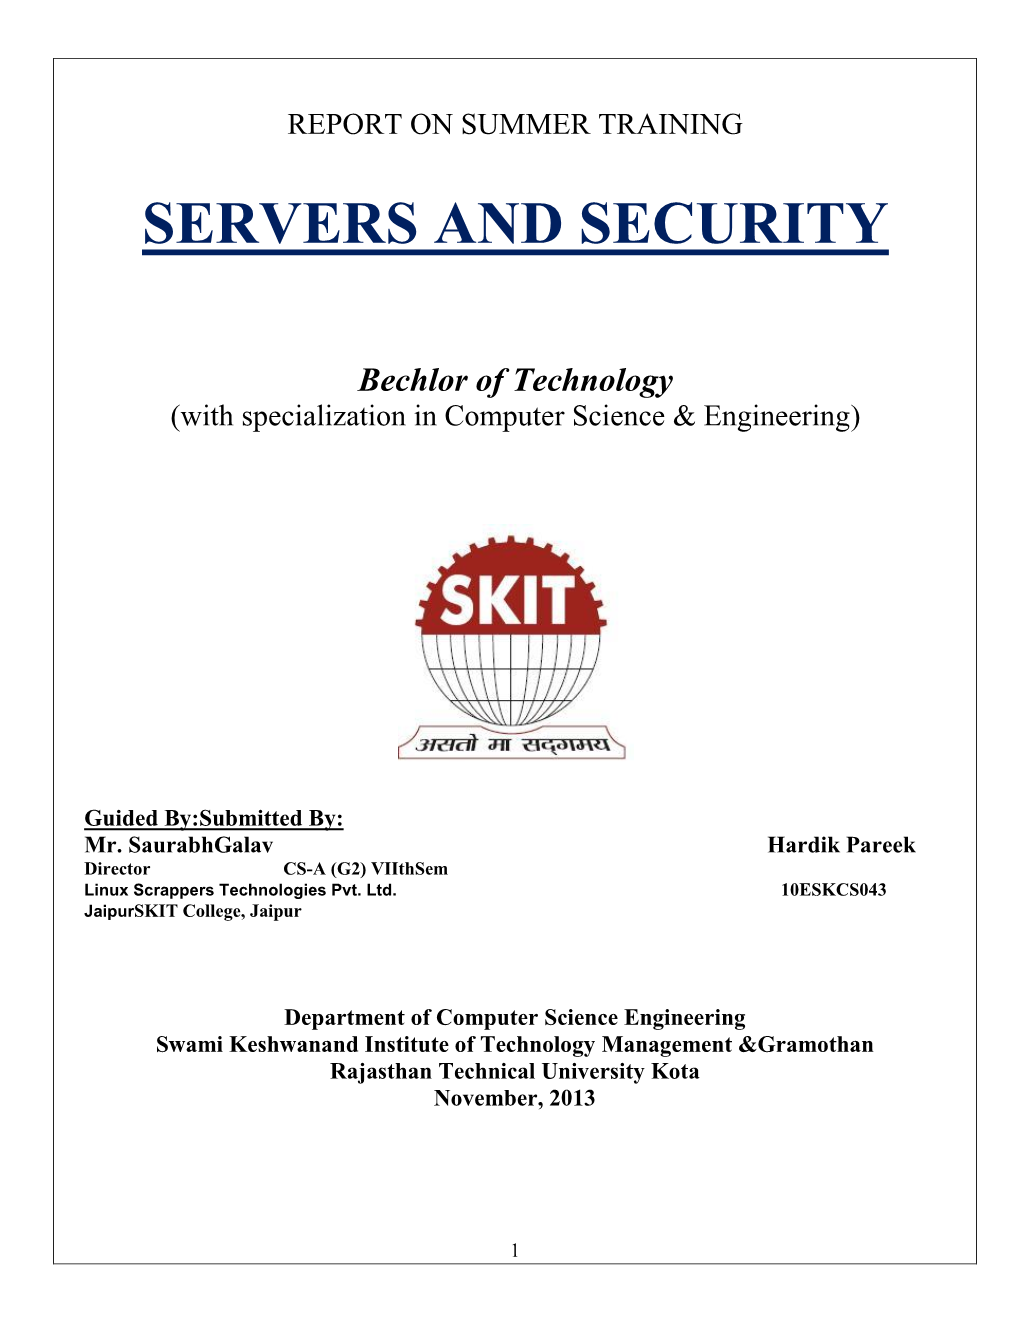 Servers and Security